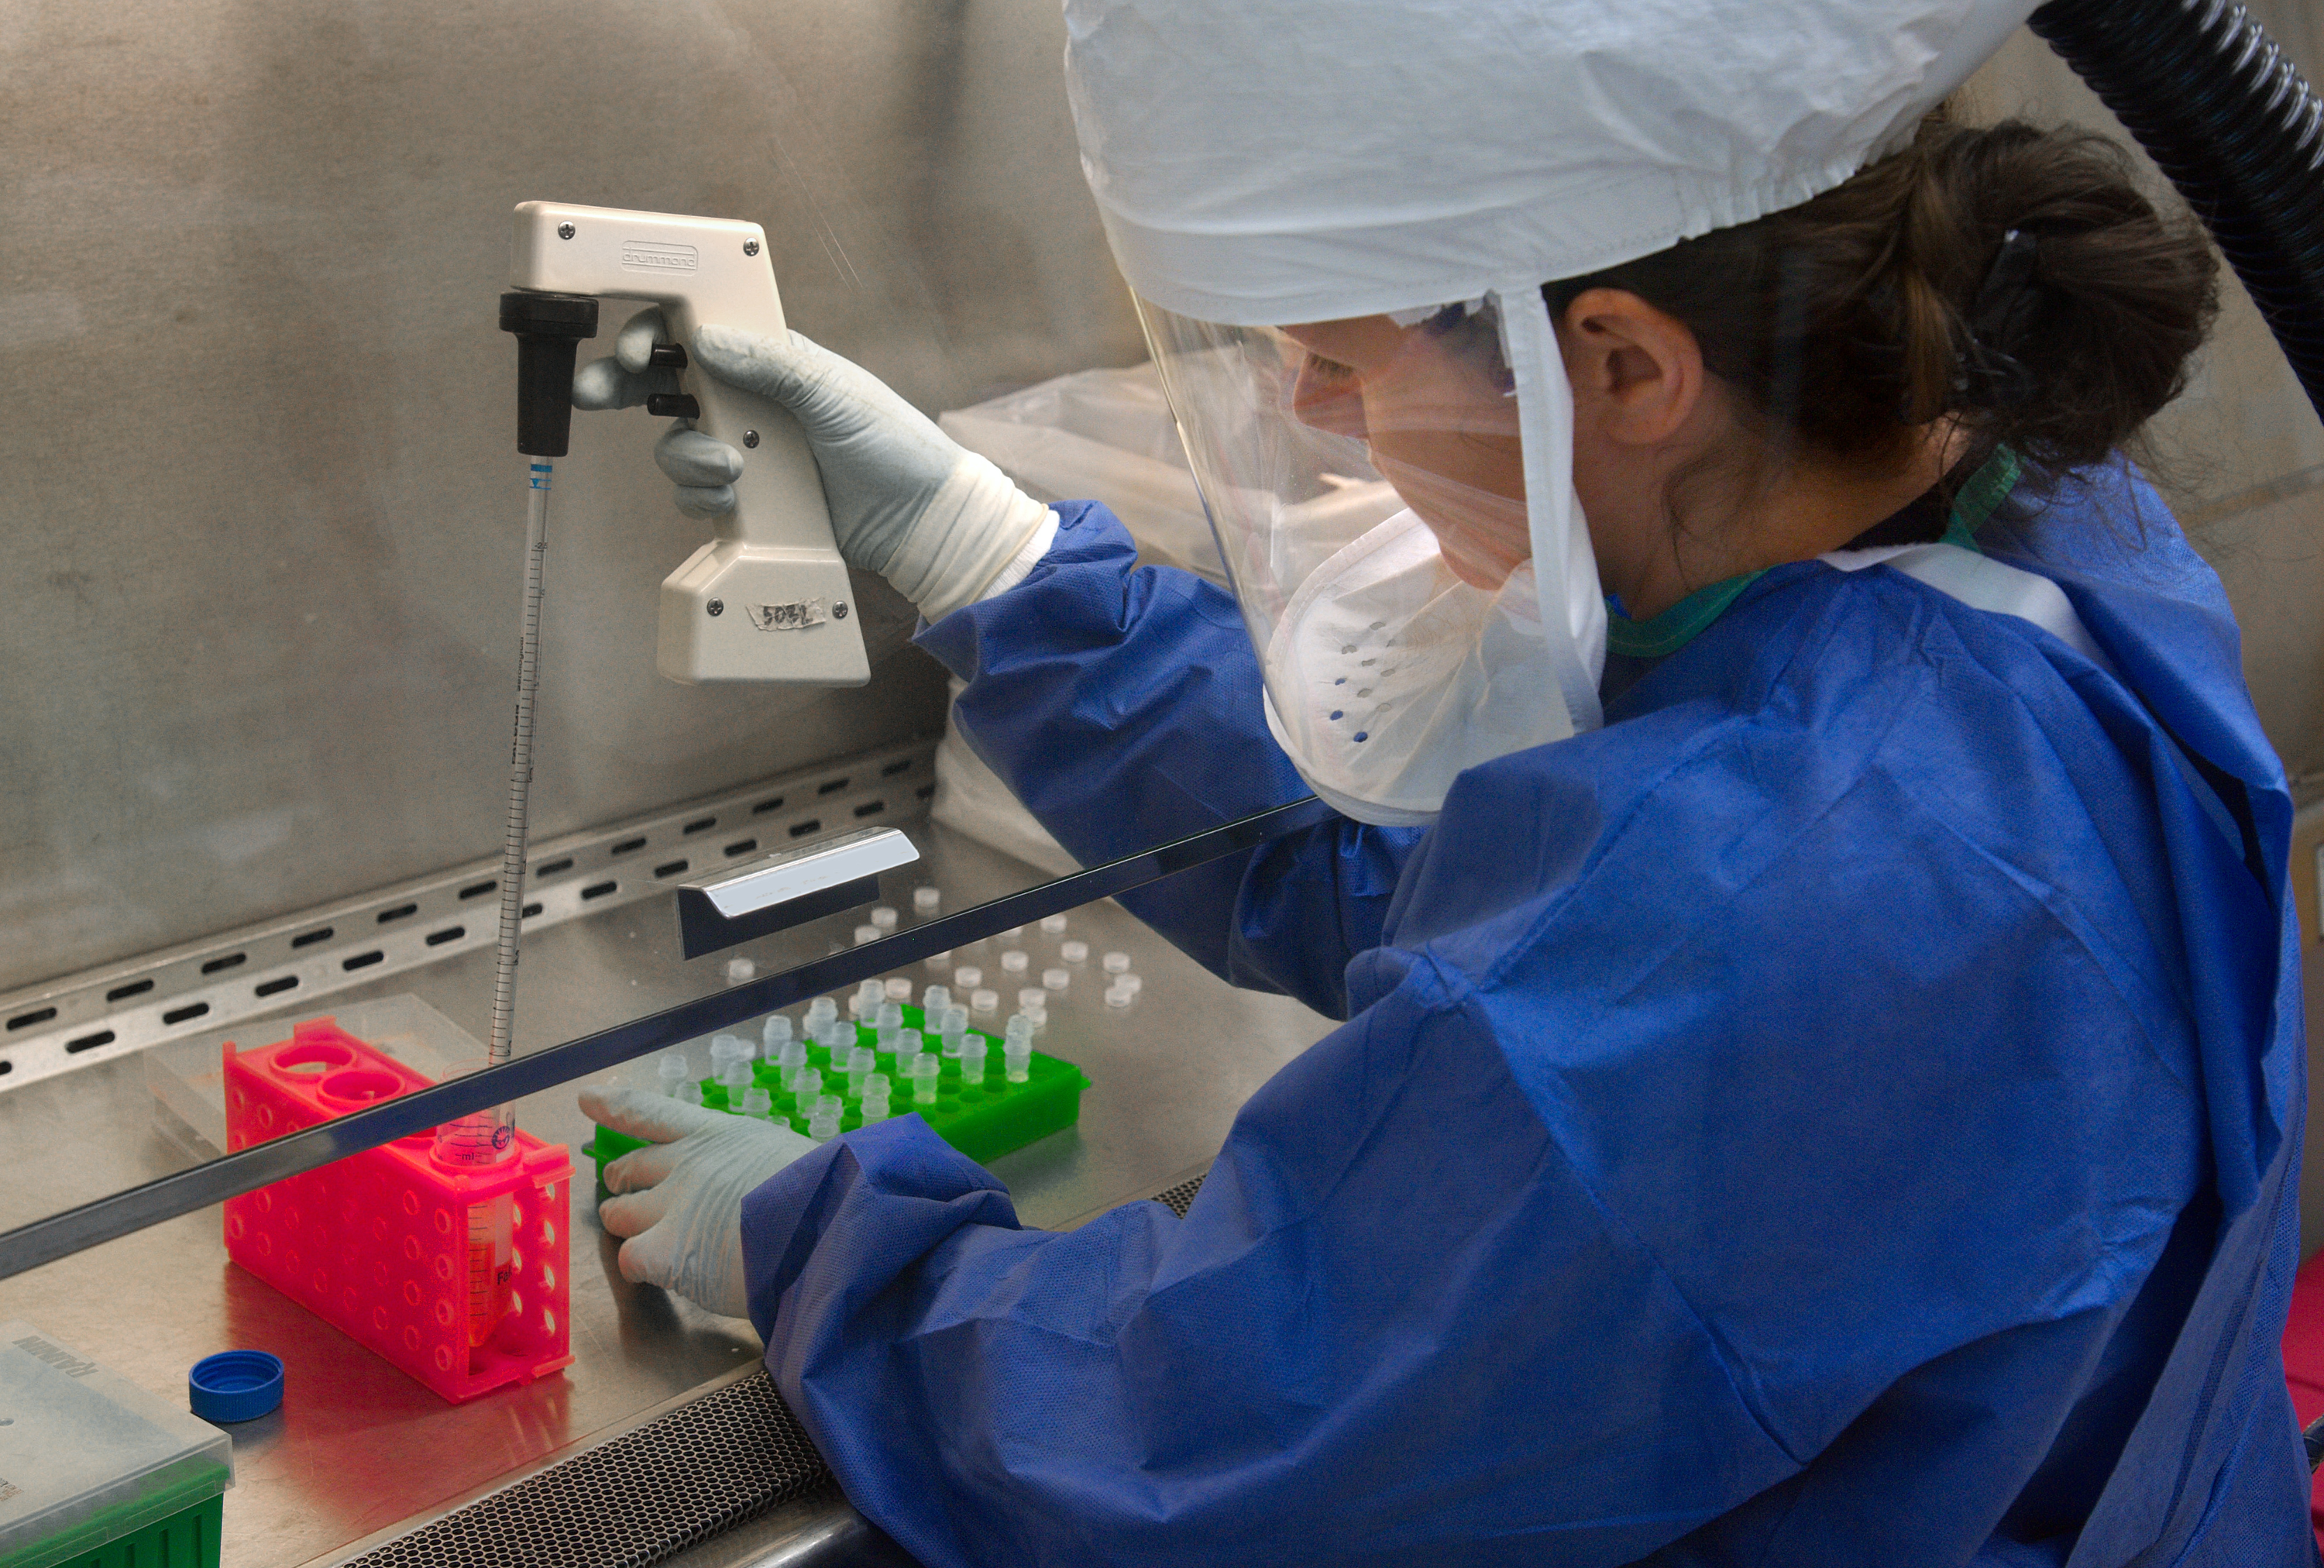 A laboratory scientist, in protective gear, holds a pippette to transfer samples from one test tube to several other test tubes on a rack.